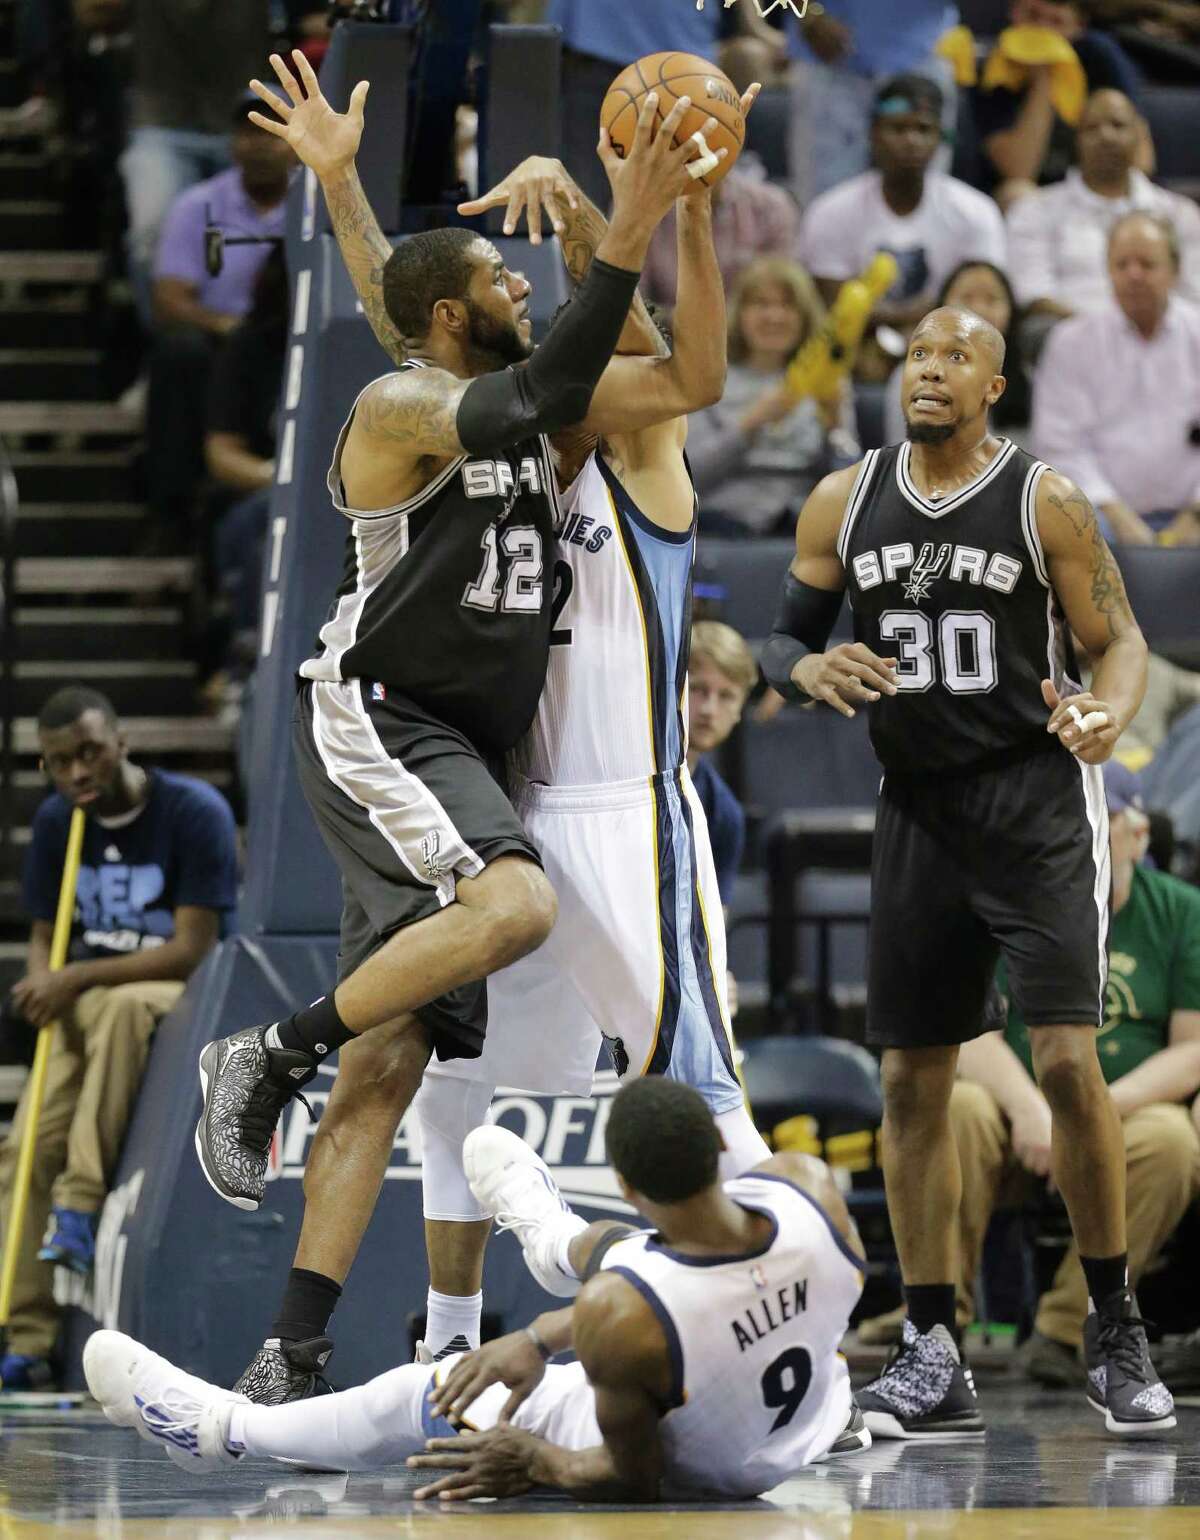 San Antonio Spurs forward LaMarcus Aldridge (12) shoots between Memphis Grizzlies forward Matt Barnes (22) and Tony Allen (9) during the first half of Game 3 in a first-round NBA basketball playoff series Friday, April 22, 2016, in Memphis, Tenn. Spurs forward David West (30) watches the play. (AP Photo/Mark Humphrey)